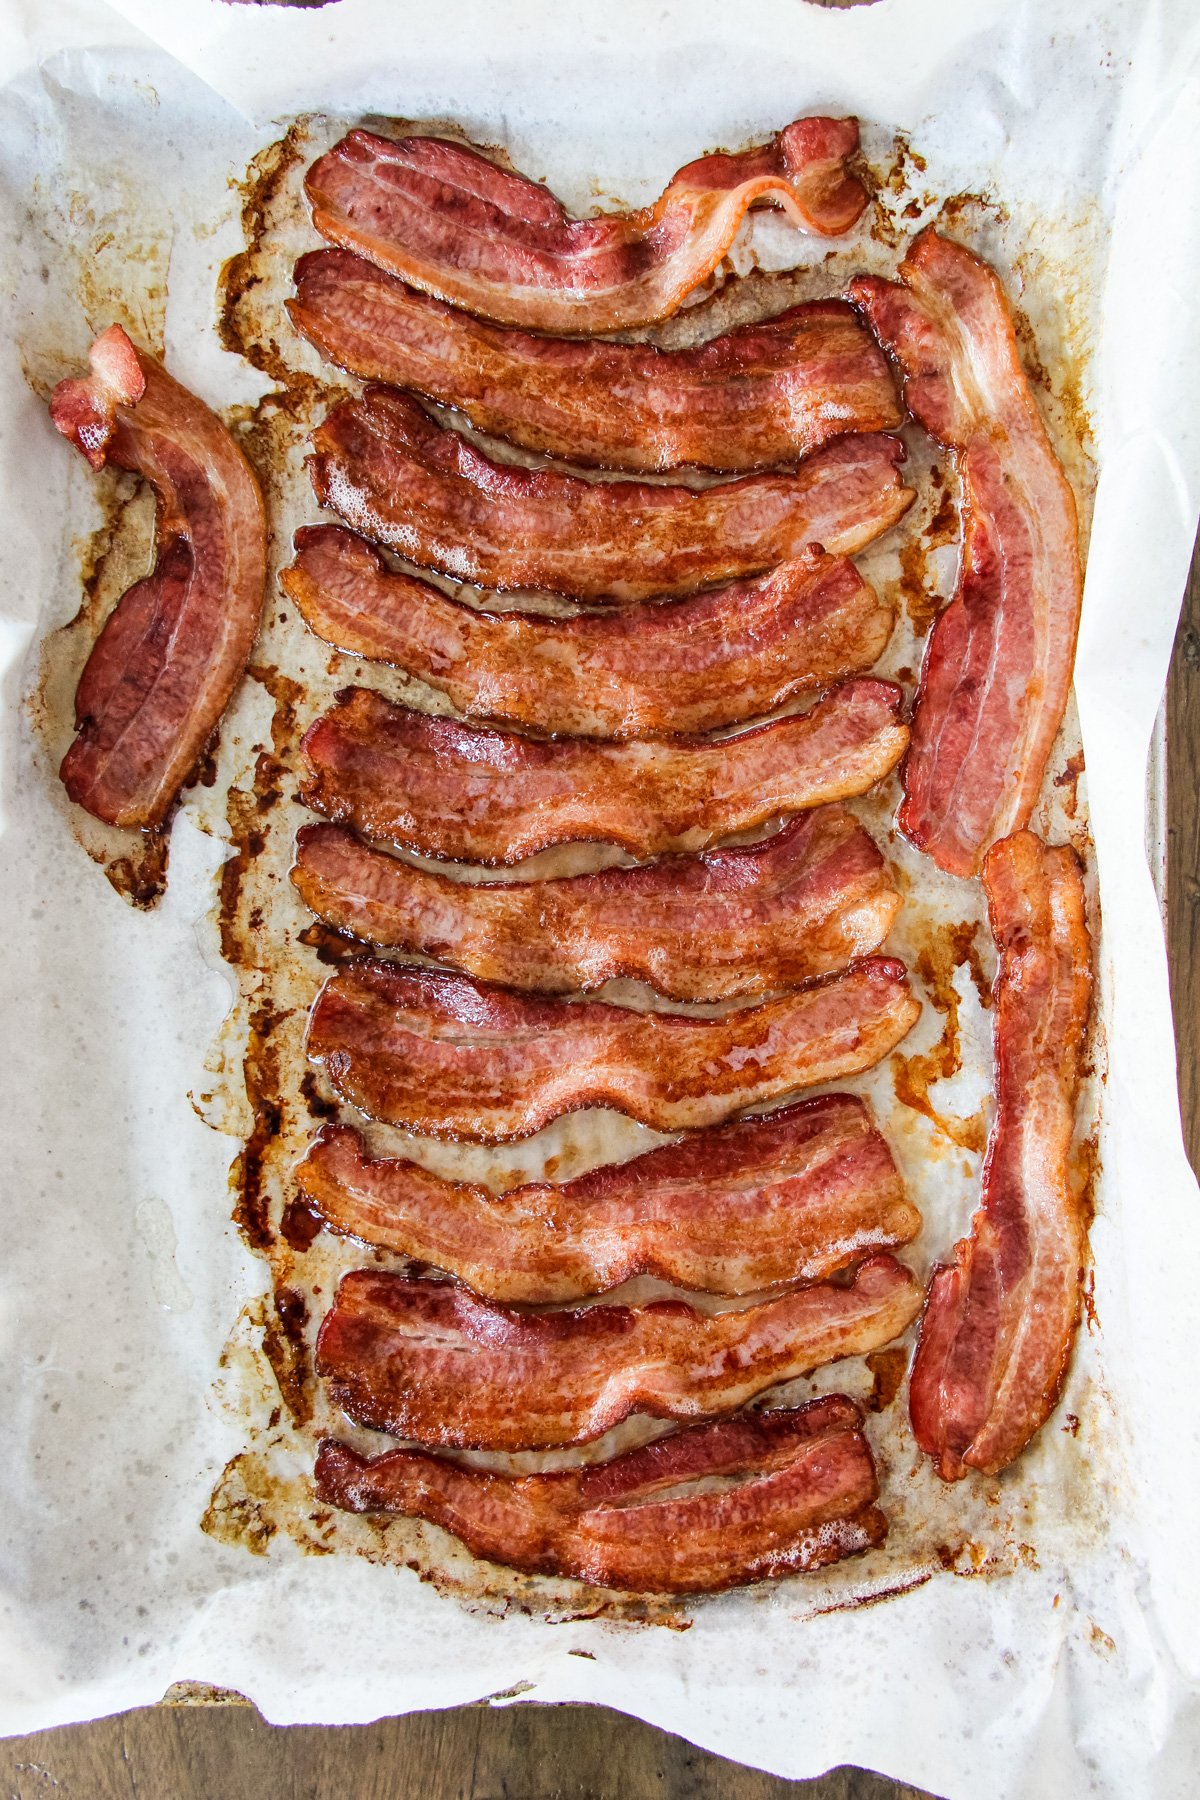 https://ourtastykitchen.com/wp-content/uploads/2023/01/OTK-How-to-Make-Bacon-in-the-Oven-the-easiest-way-ever-4.jpg